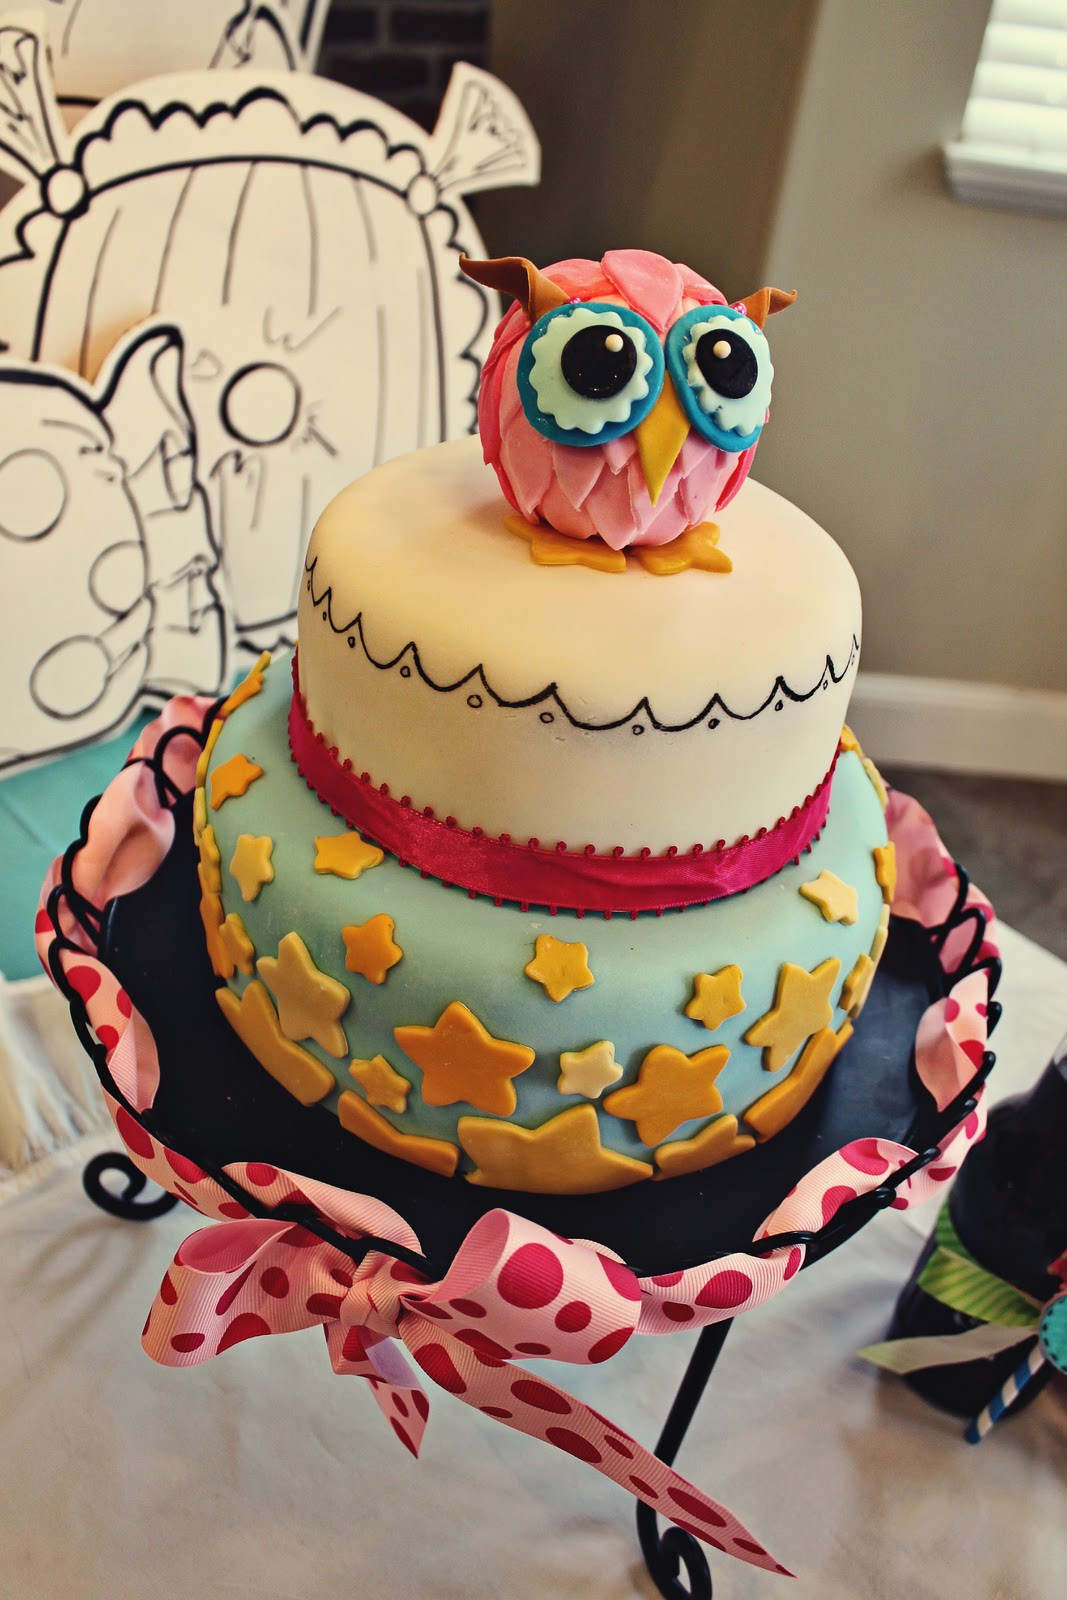 Owl Birthday Cakes
 Pull out a Plum Owl Cake